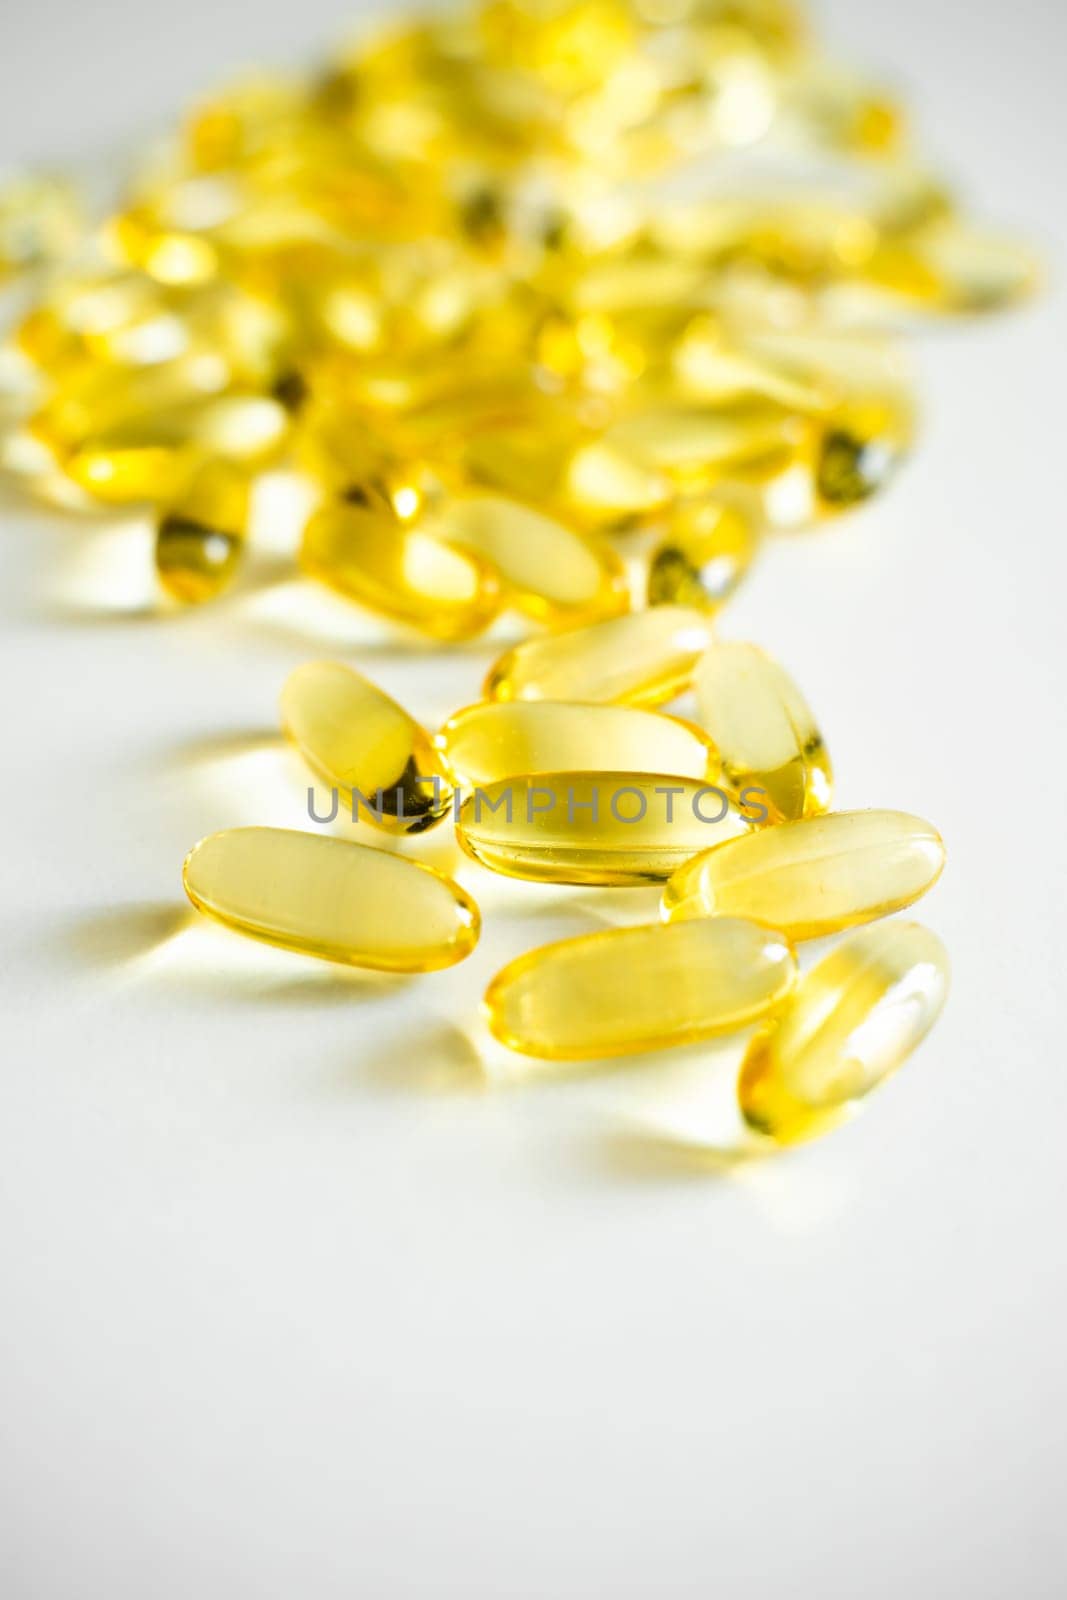 Fish oil supplement capsules on a white surface as a background. Oil filled capsules of food supplements. Fish oil, omega 3